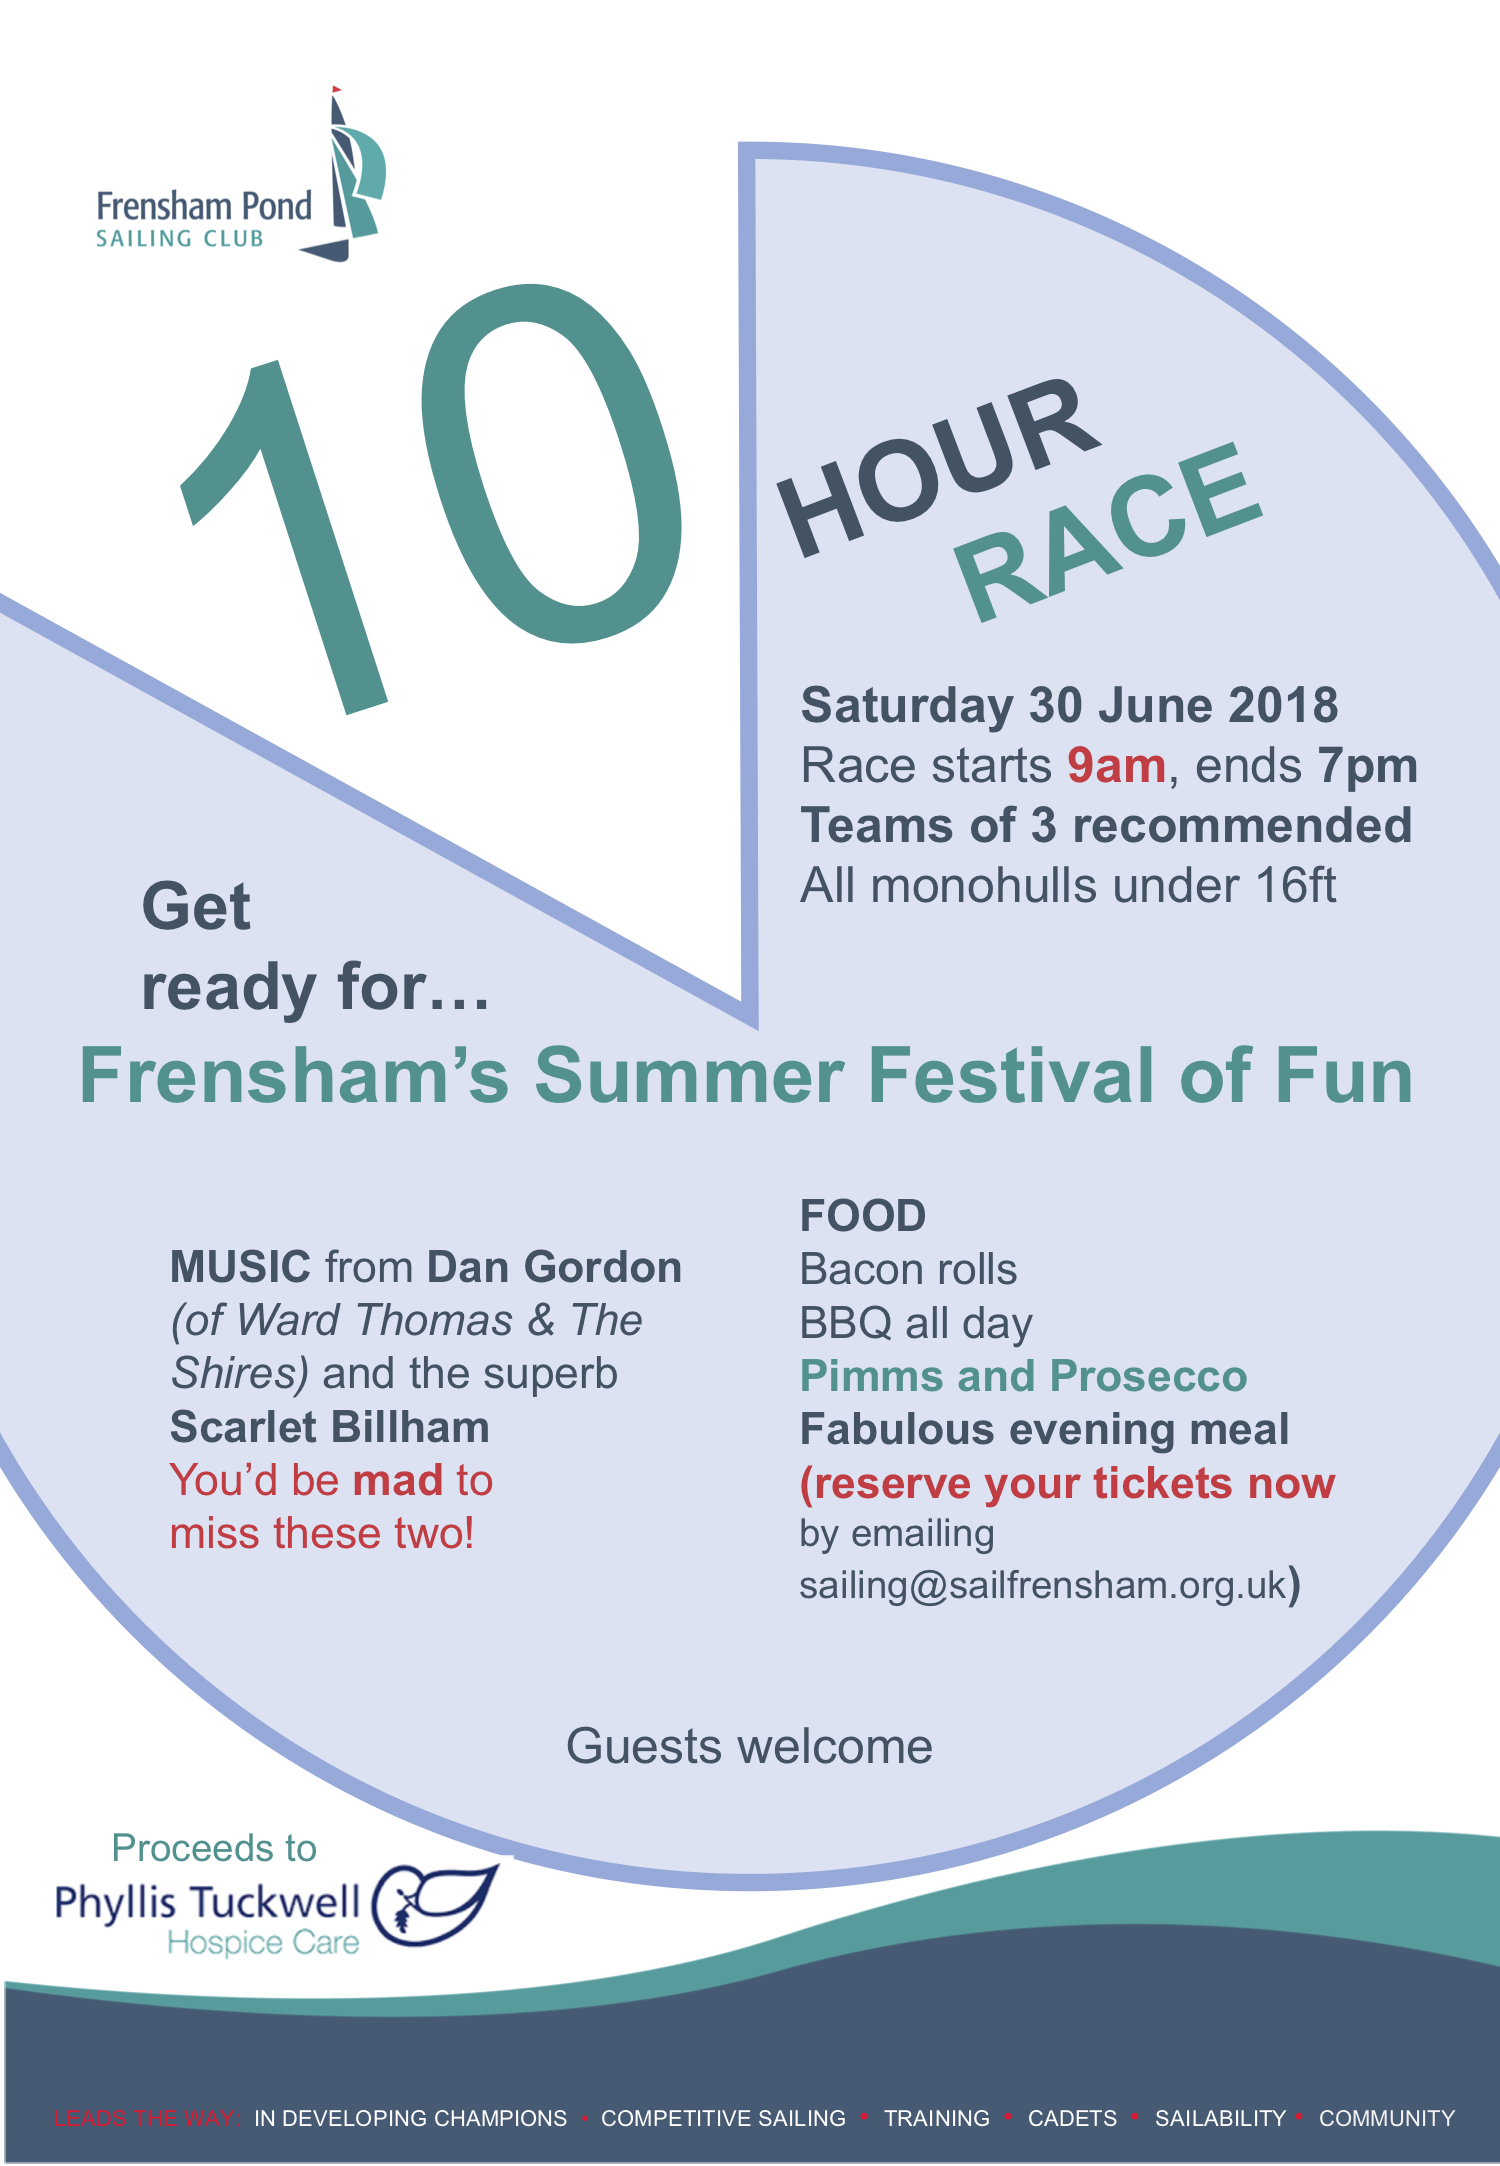 Poster for 10 Hour Race Sat 30 June 2018